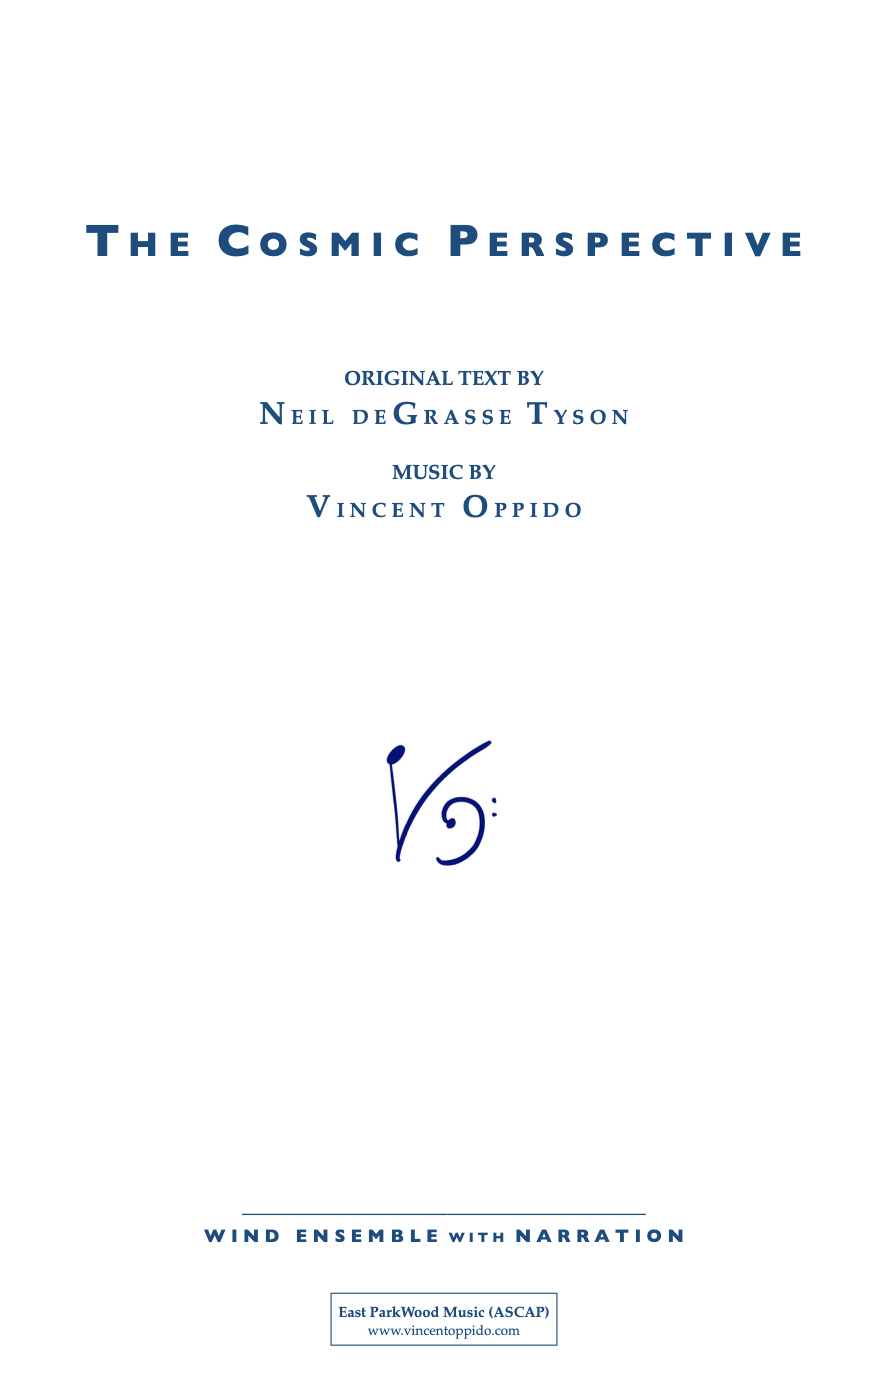 The Cosmic Perspective (Score Only) by Vincent Oppido